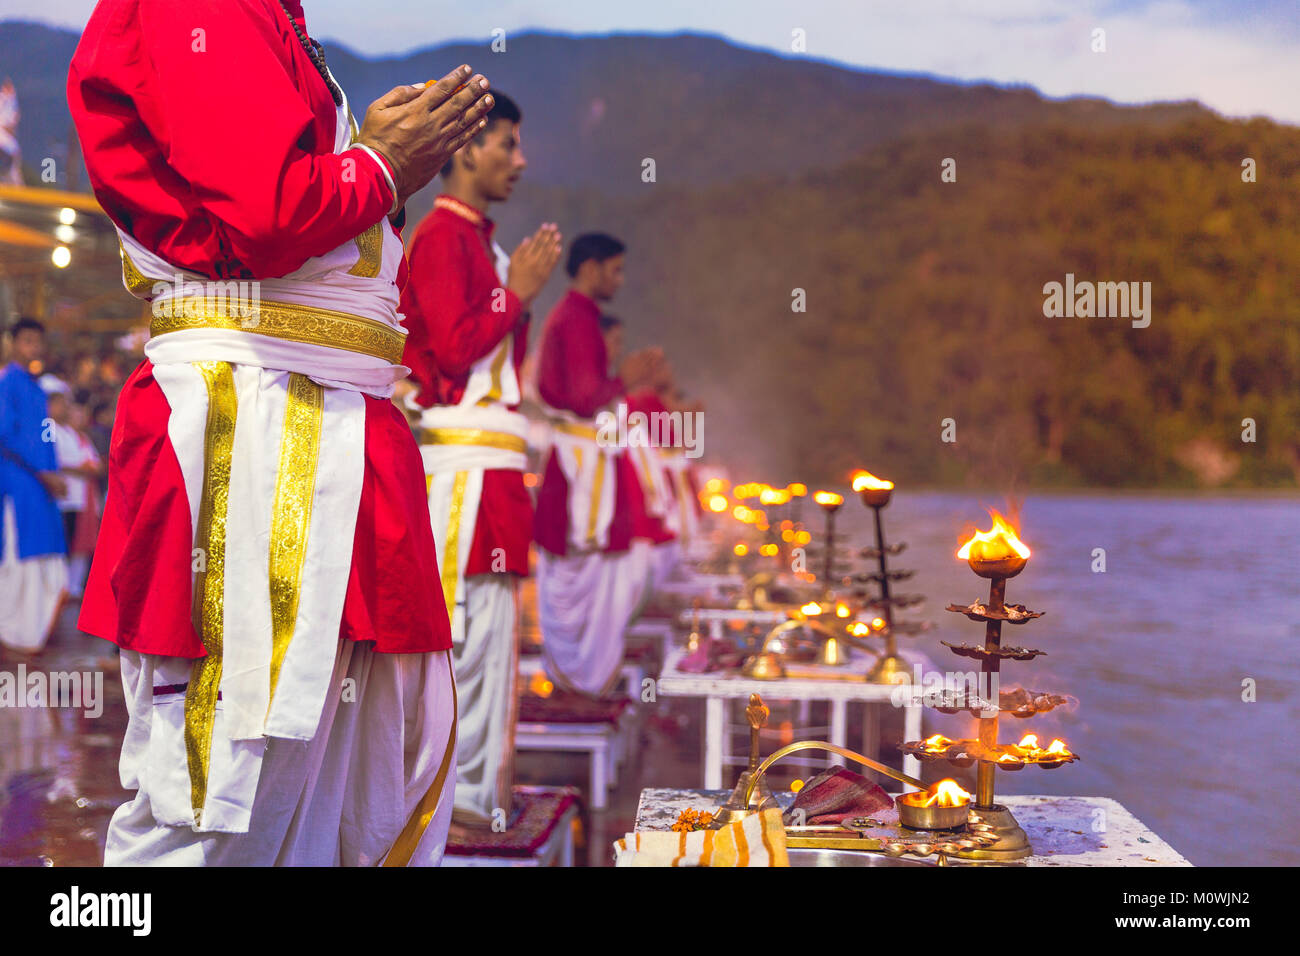 Rishikesh, Uttarakhand - August 03 2016: Priests in red robe in the holy city of Rishikesh in Uttarakhand, India during the evening light ceremony Stock Photo